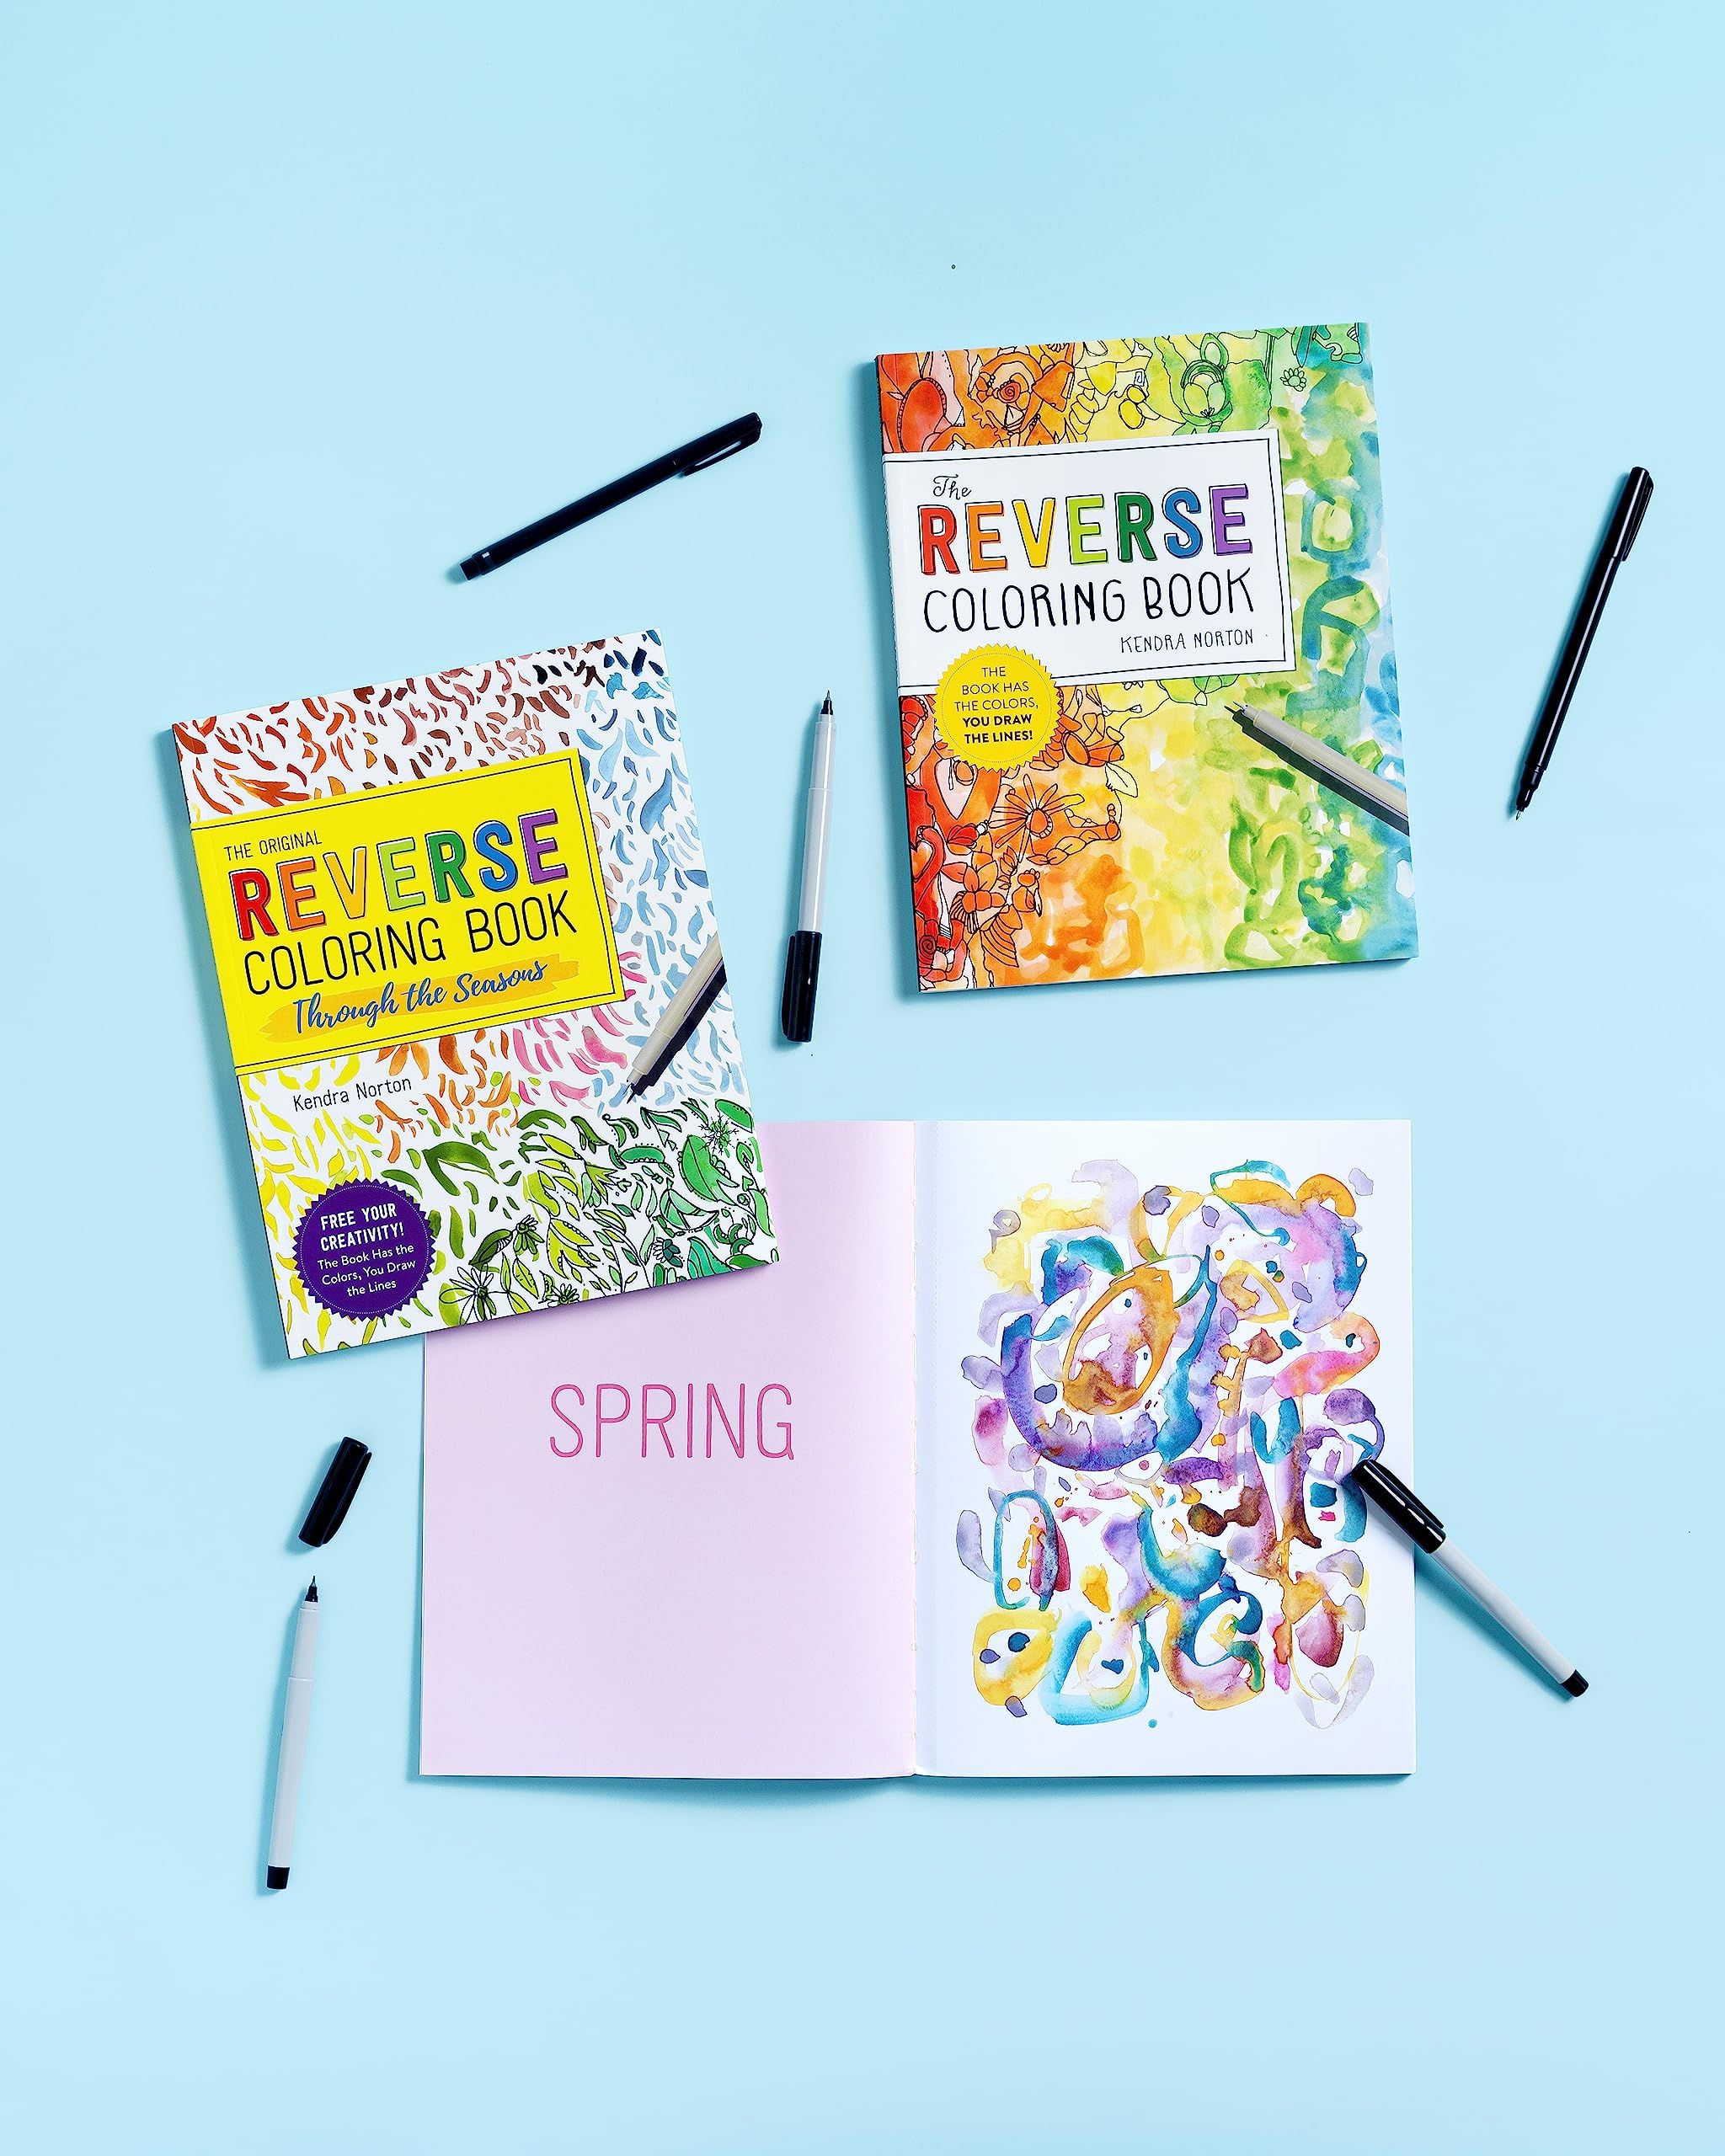 What is a reverse coloring book? The hottest relaxation tool of 2023 and a  trending gift idea, according to Google